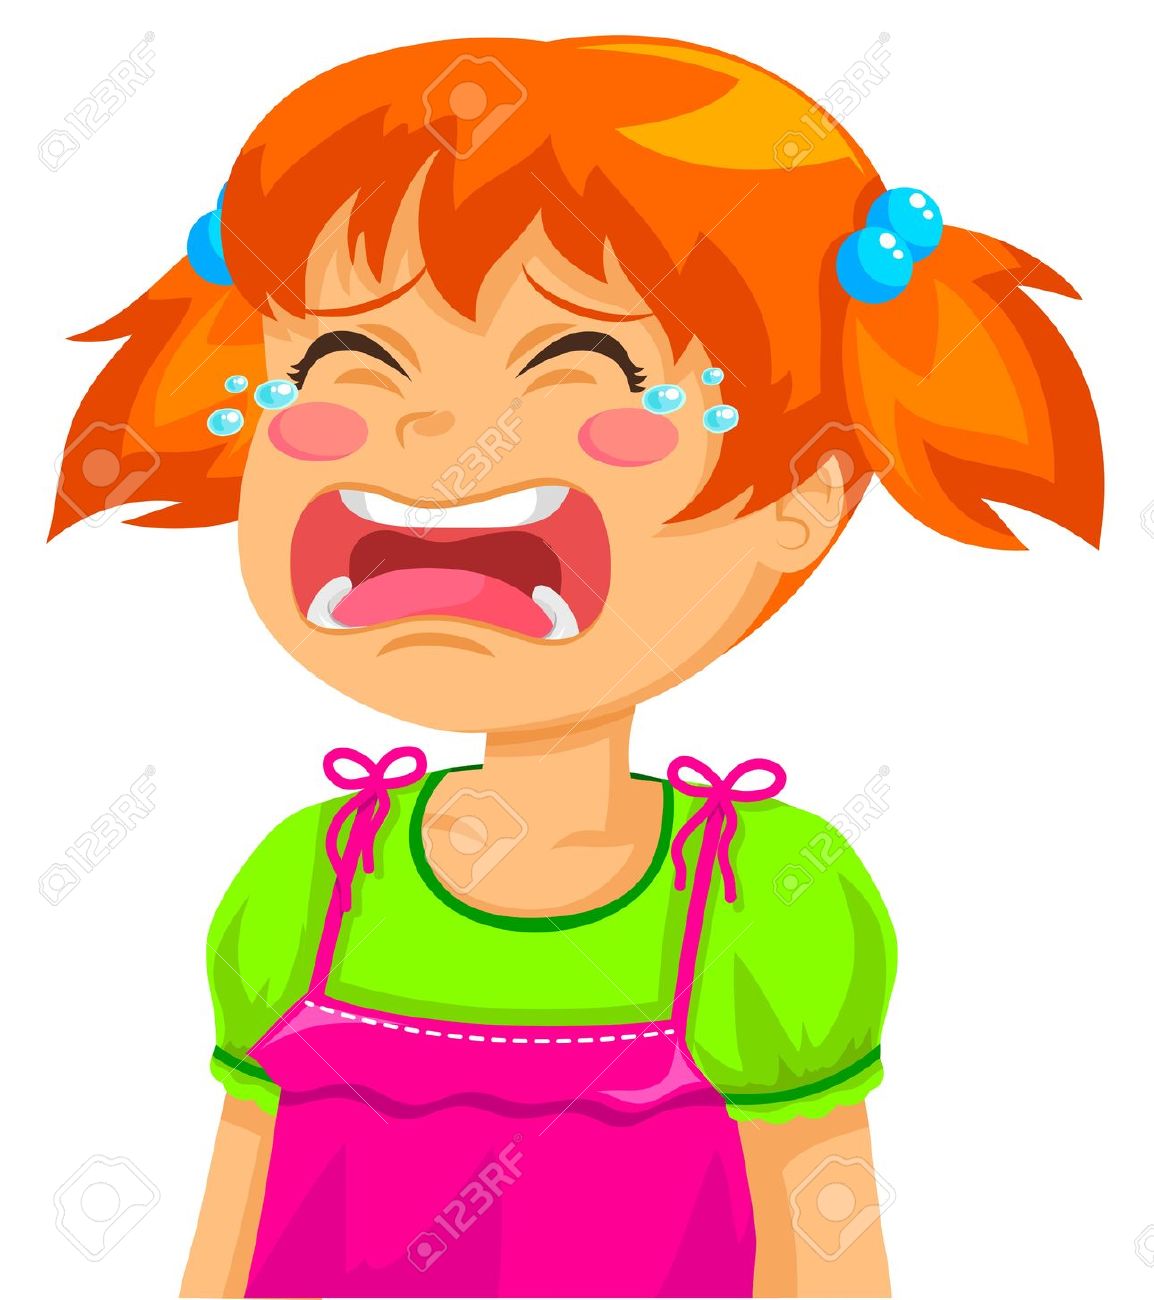 free clipart man crying - photo #34